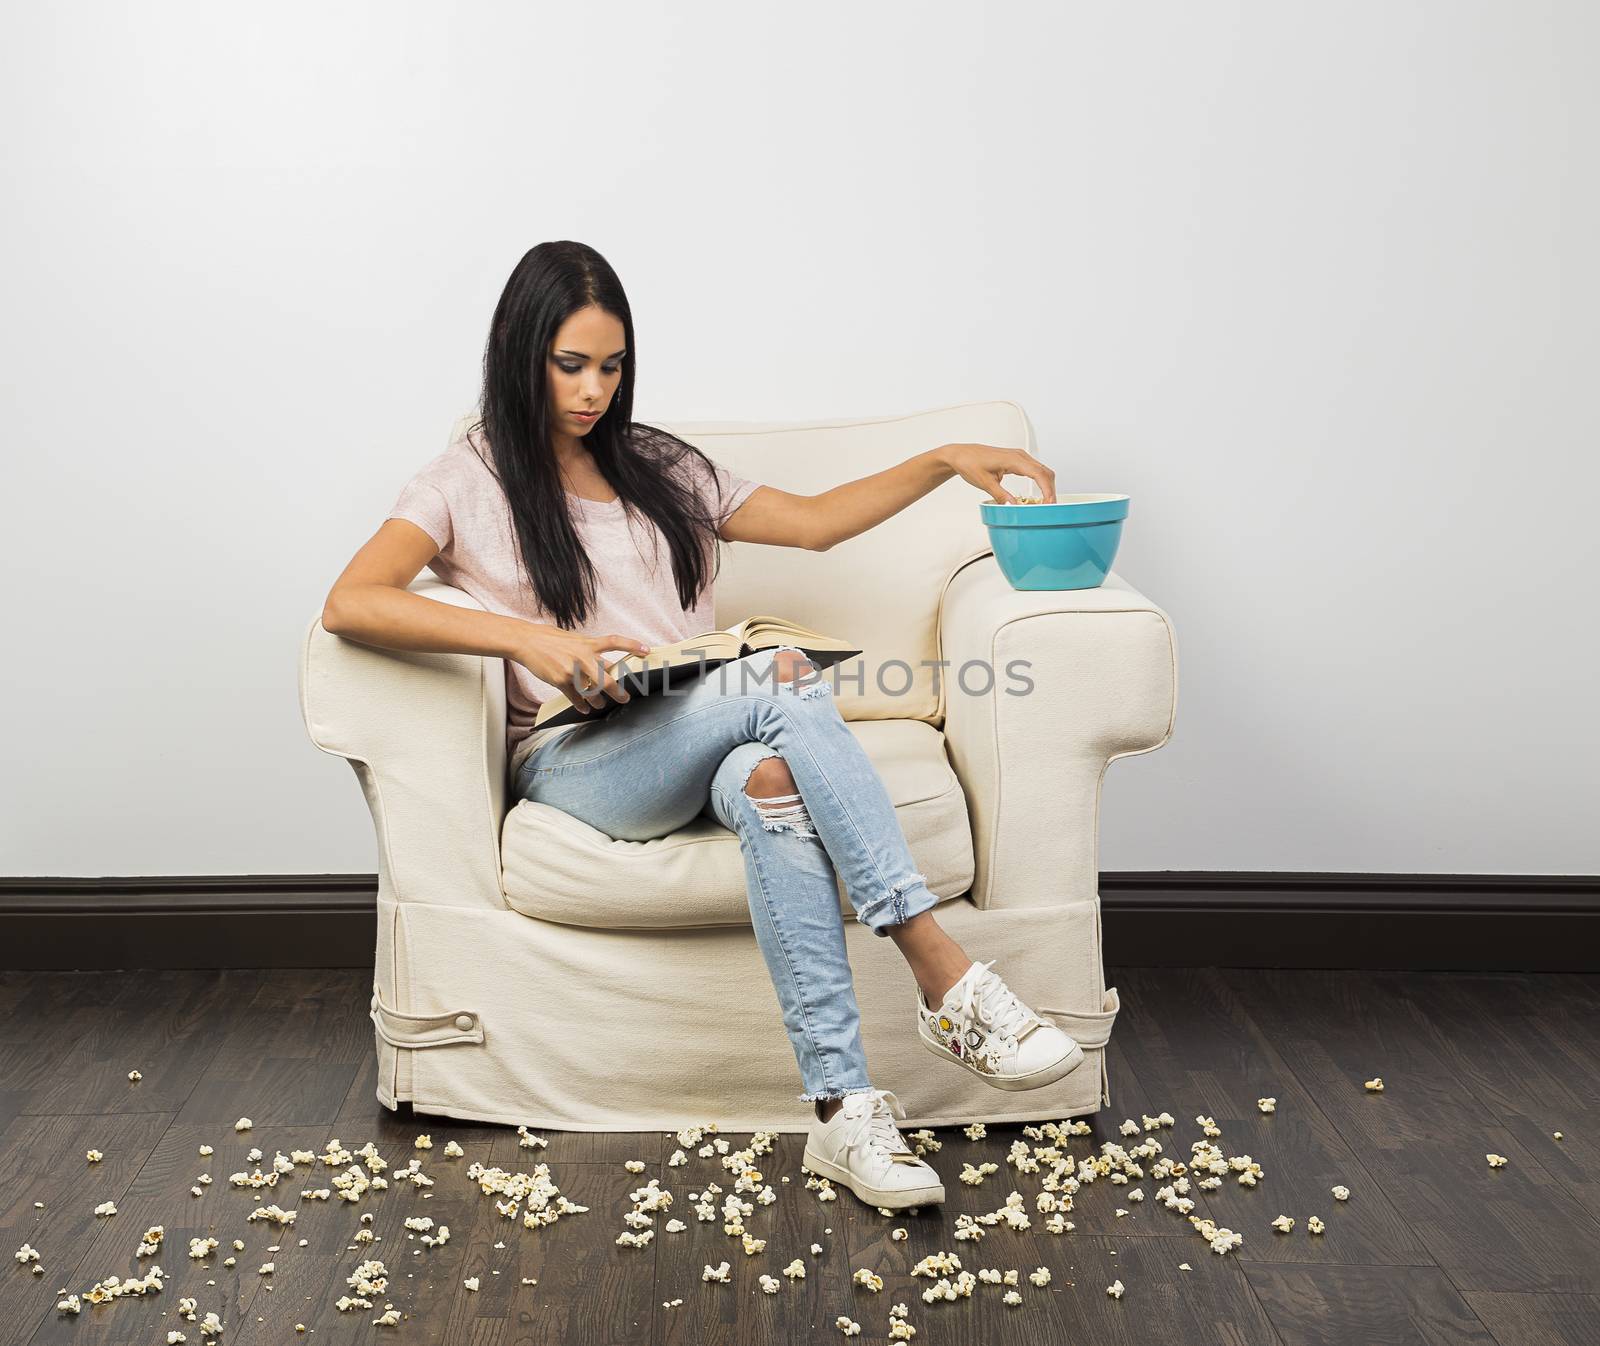 young woman, sitting on a white couch, with popcorn all over the floor, reading a book and eating popcorn